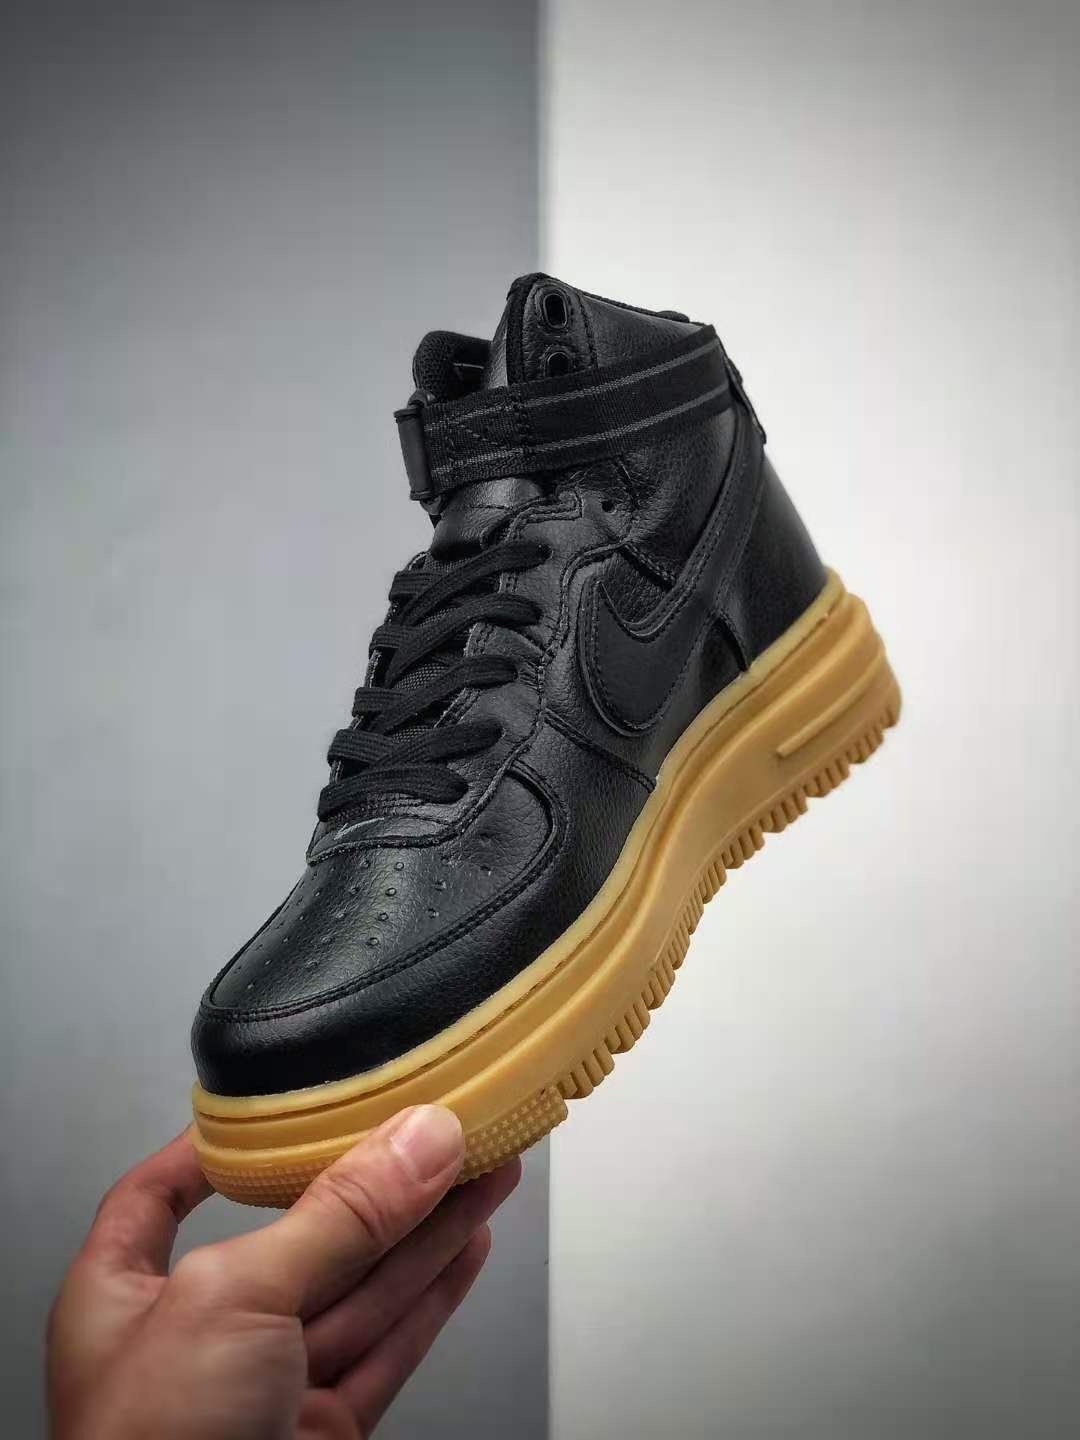 Nike Air Force 1 Gore-Tex Boot 'Black Gum' CT2815-001 - Stylish and Durable Footwear